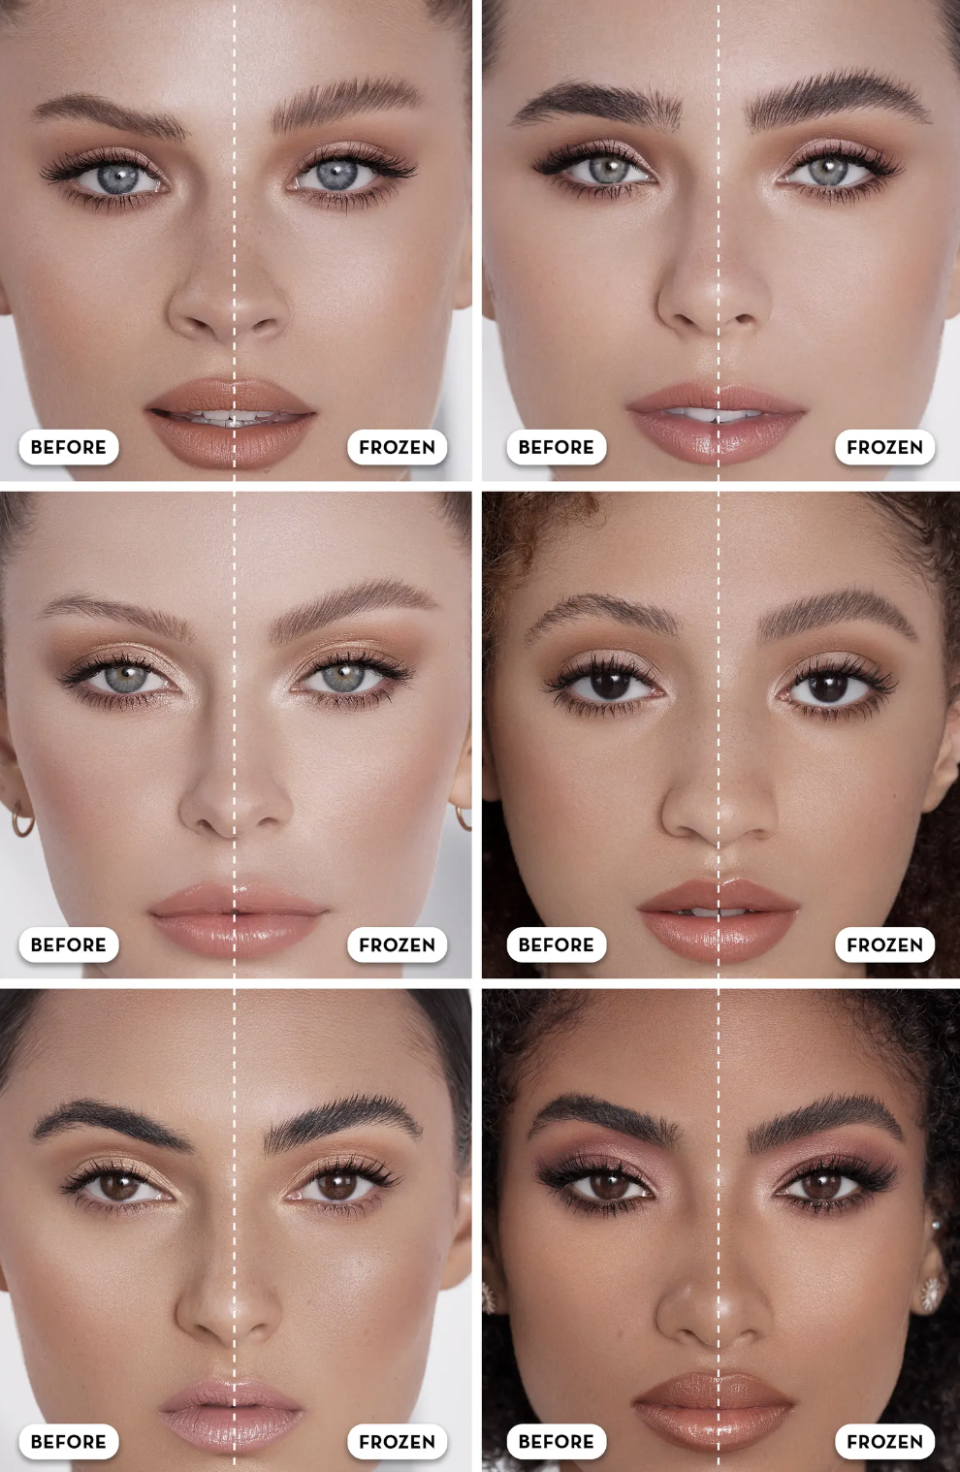 different models showing before and afters of using the product